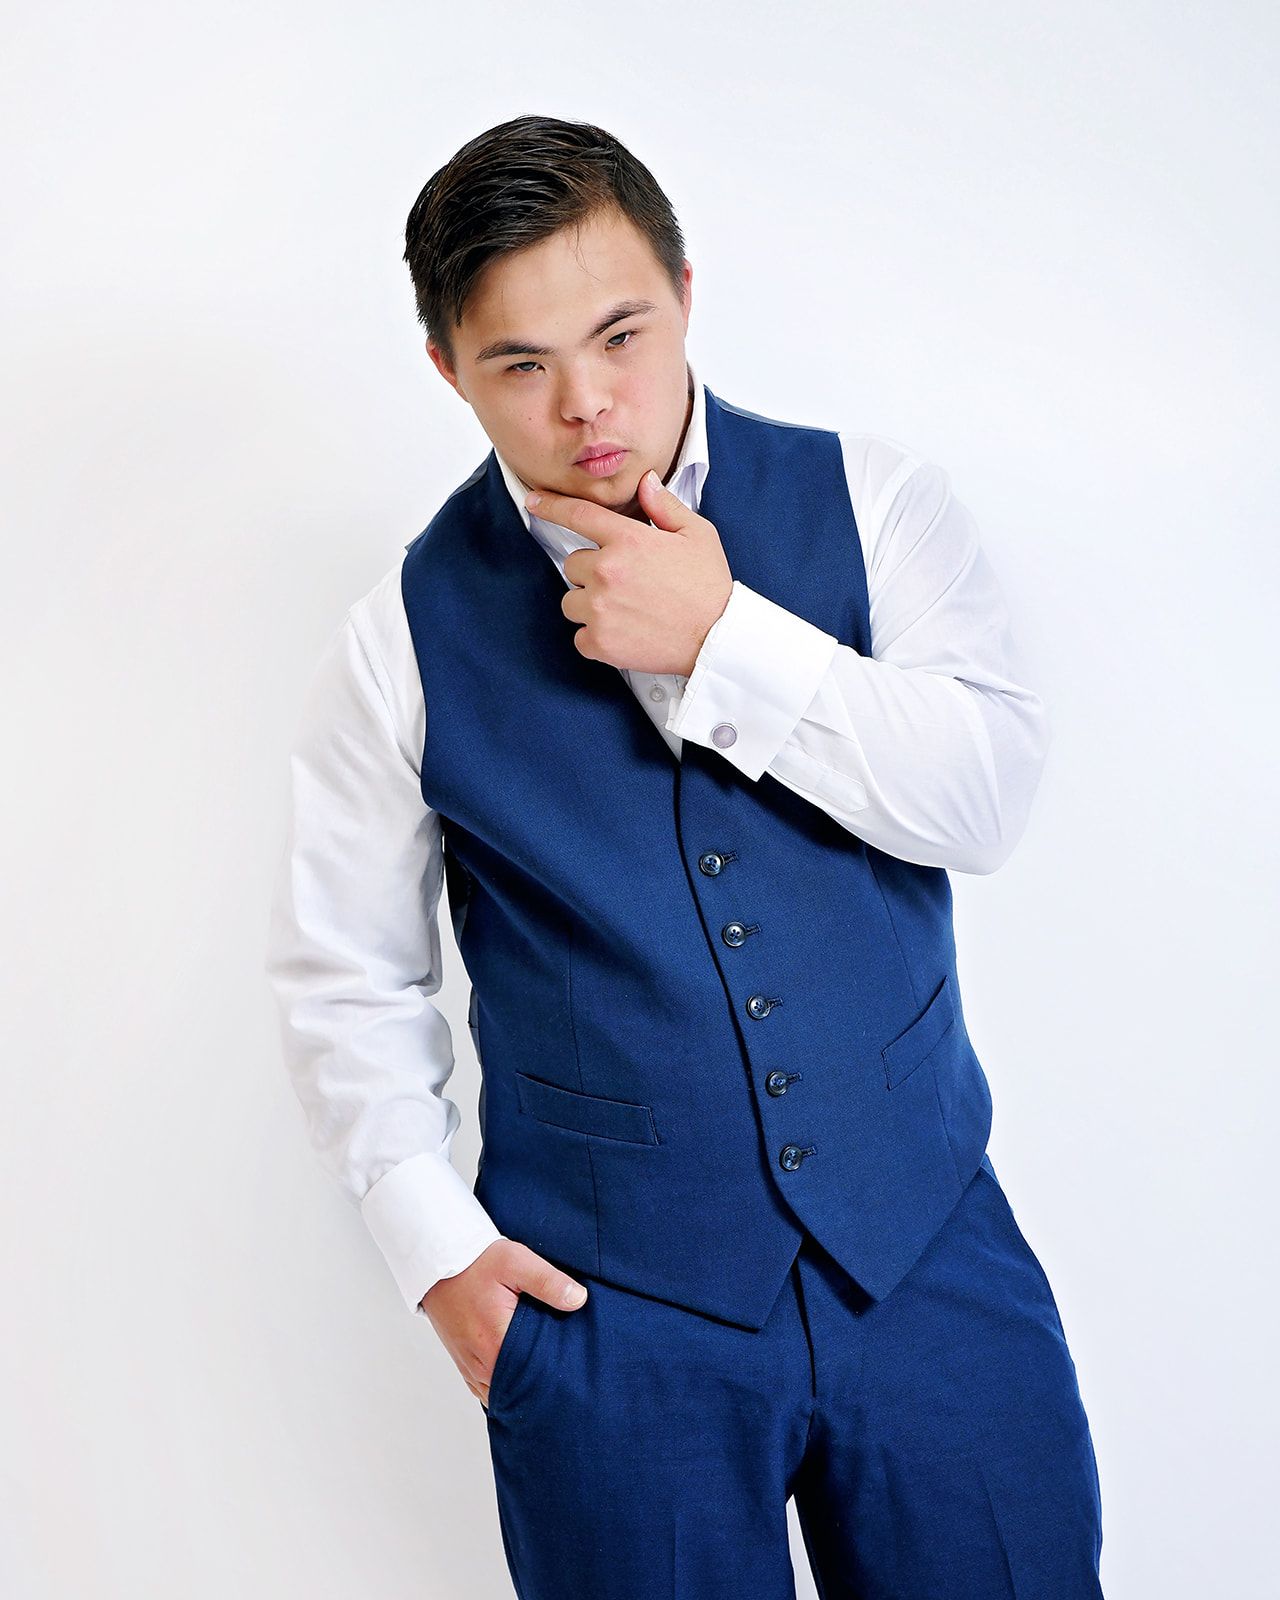 He is the first model with down syndrome